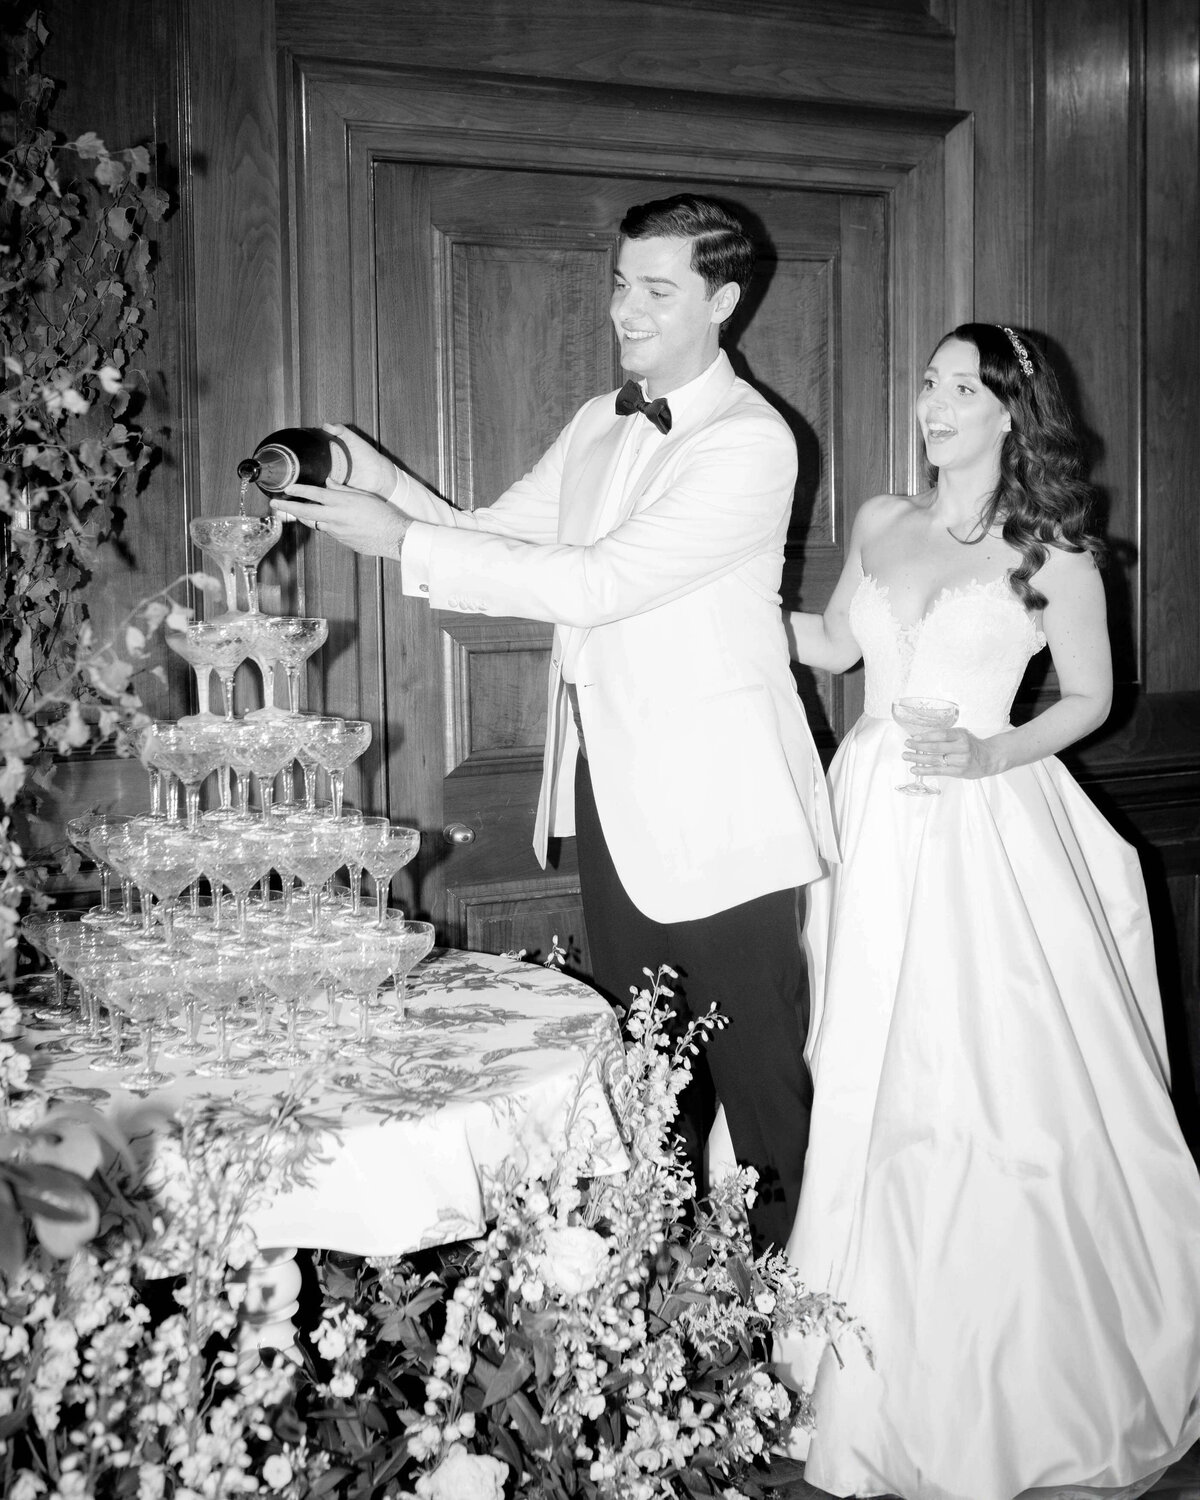 groom pours champagne into a champagne tower surrounded by meadows of flowers at luxury wedding at the ned london as his bride stands smiling next to him